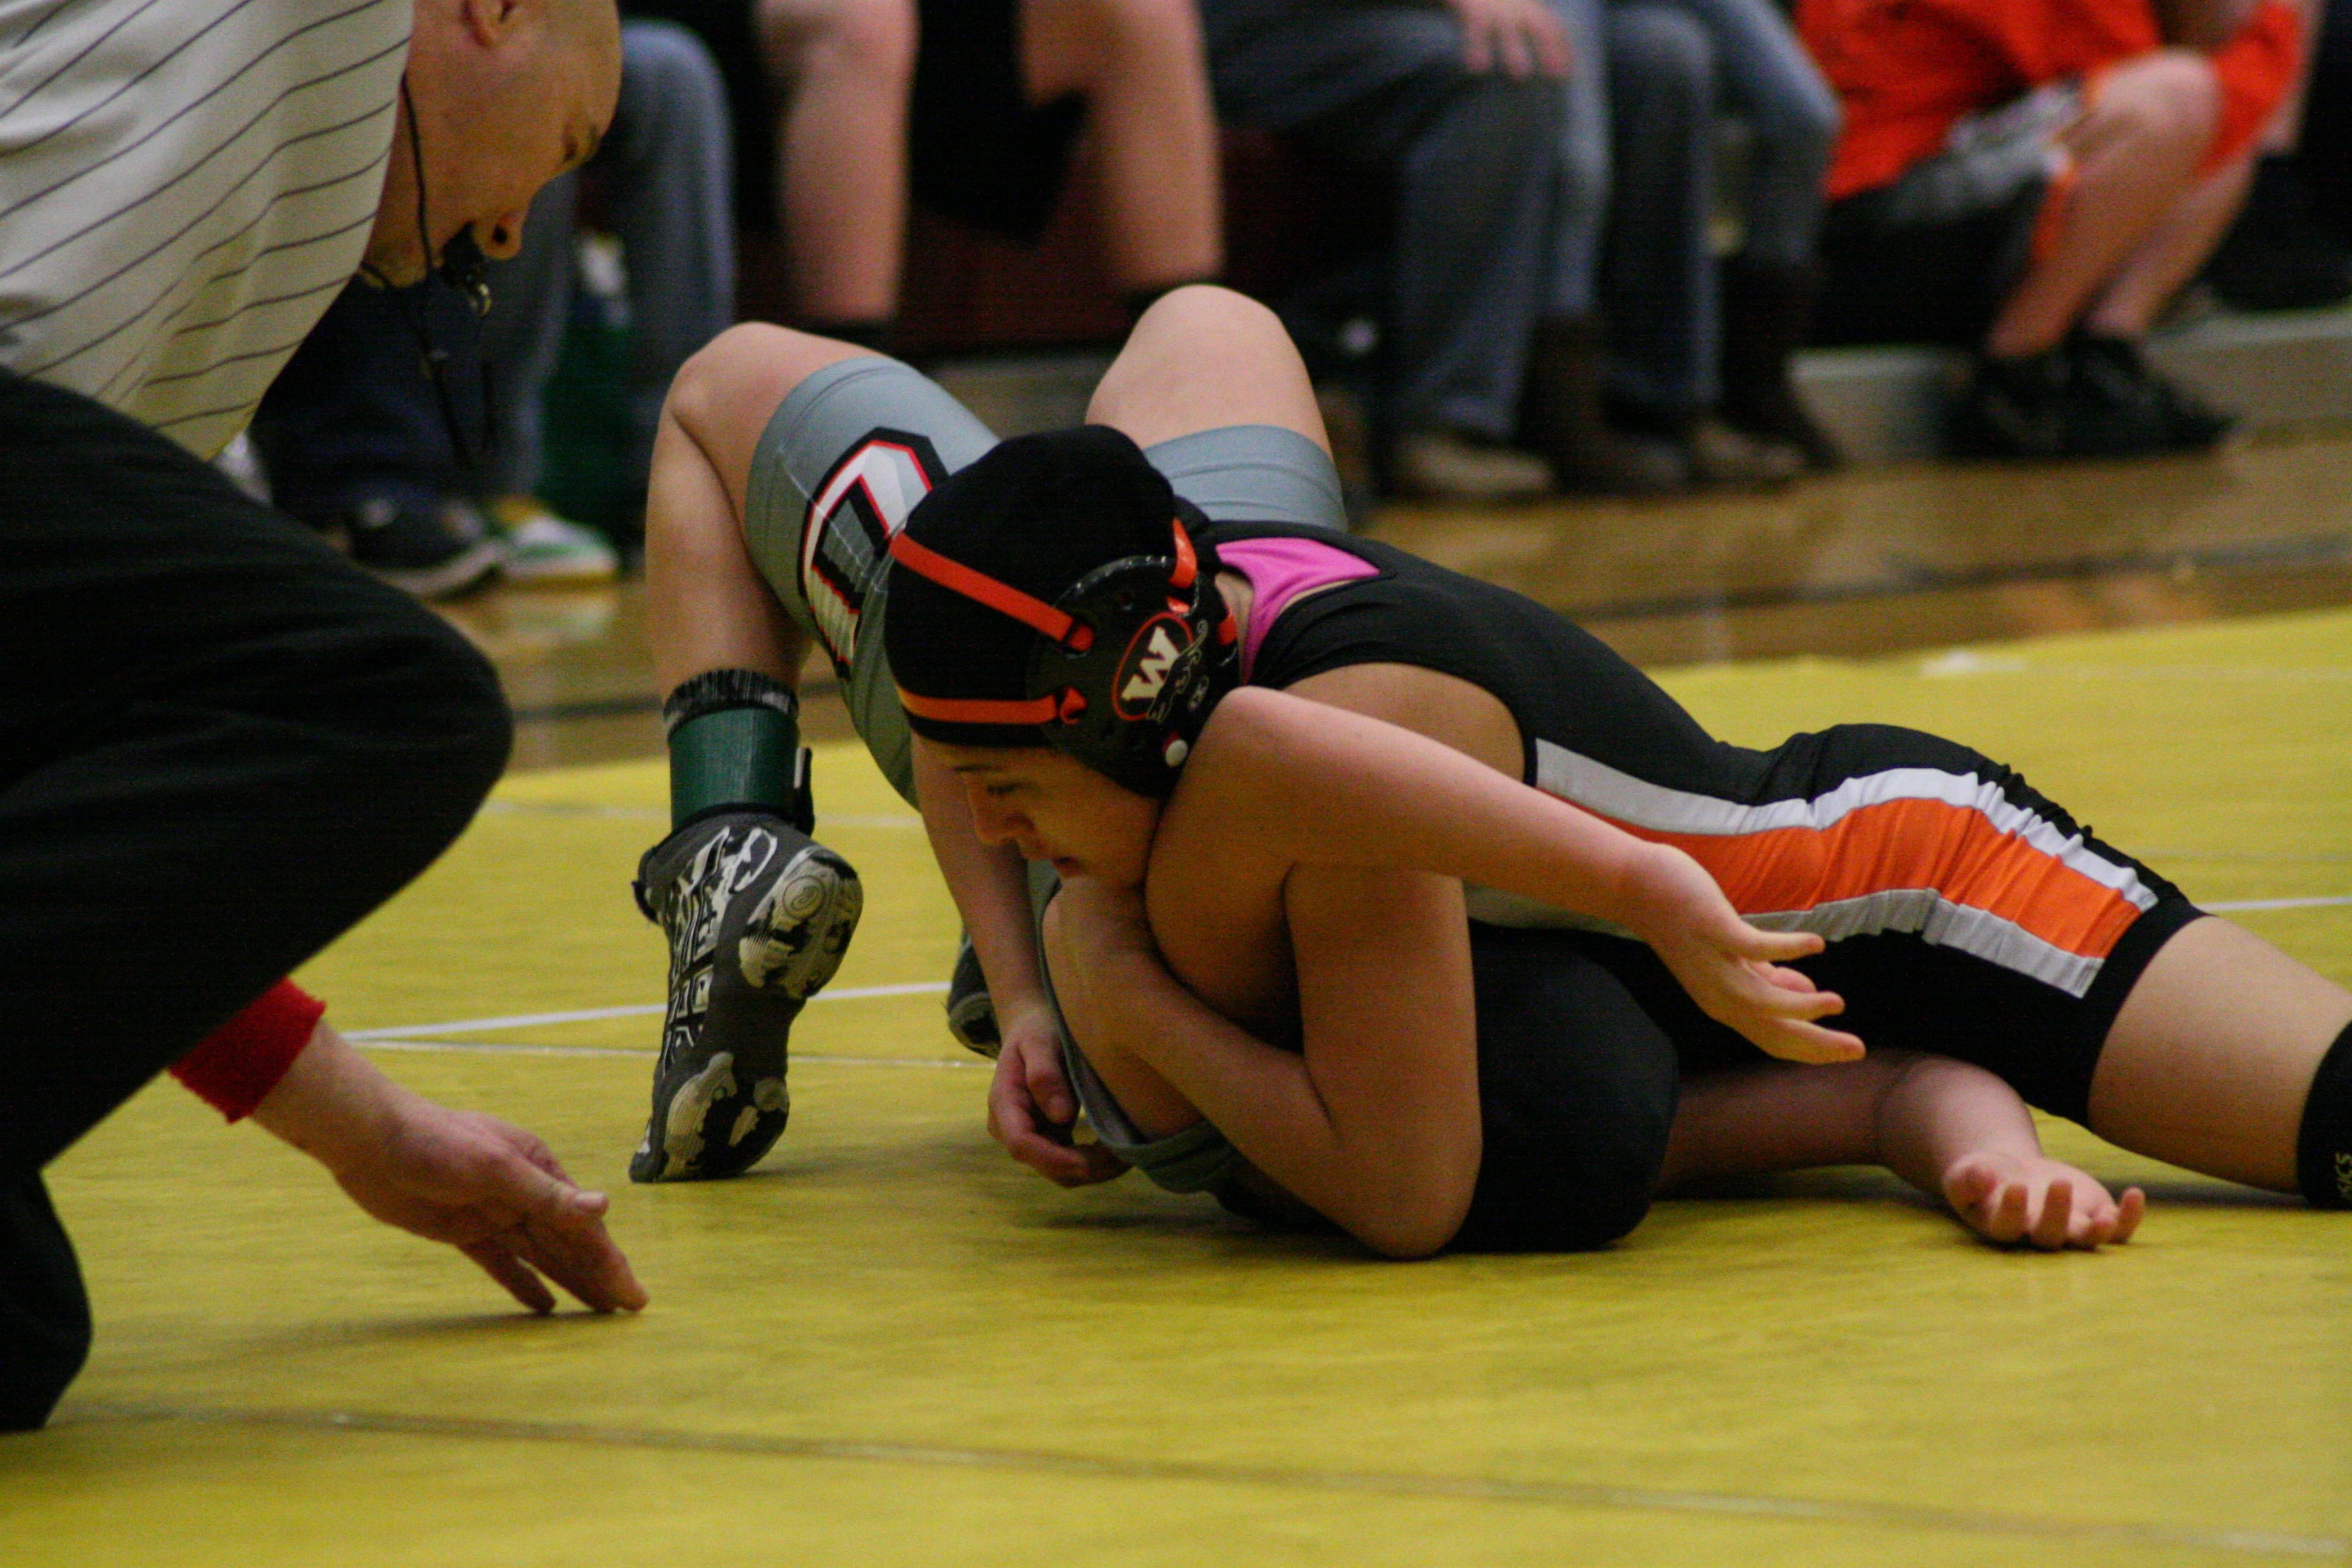 Yaneli Martinez grounds her opponent in the 105-pound county championship match.